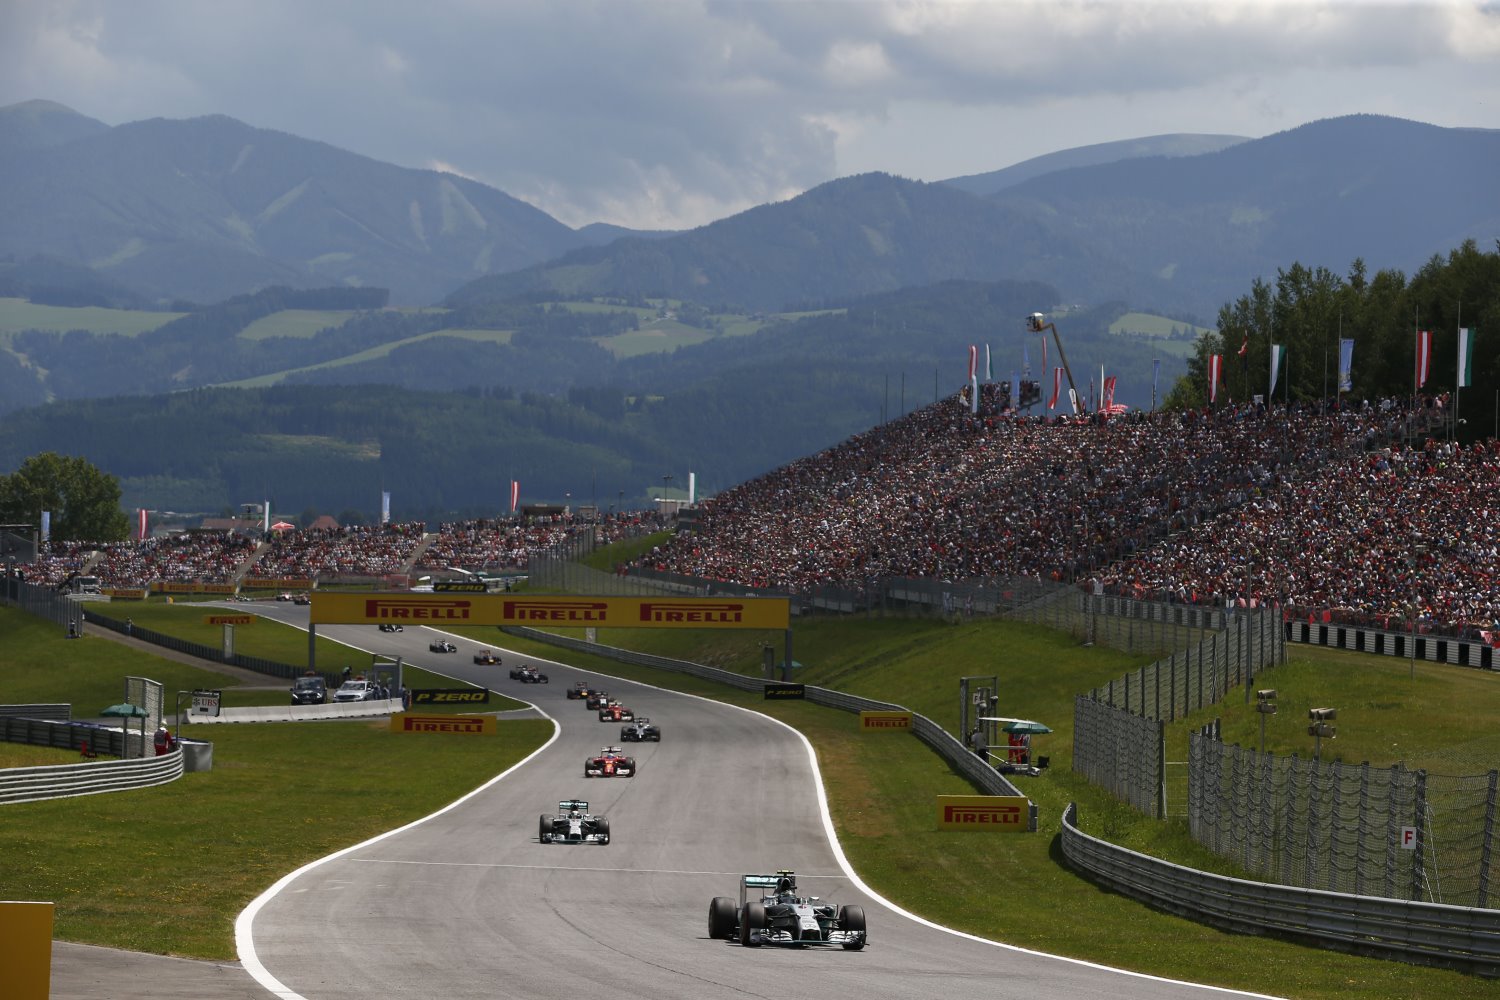 Last year the Austrians came, they heard the boring F1 cars, and they 'ain't' coming back